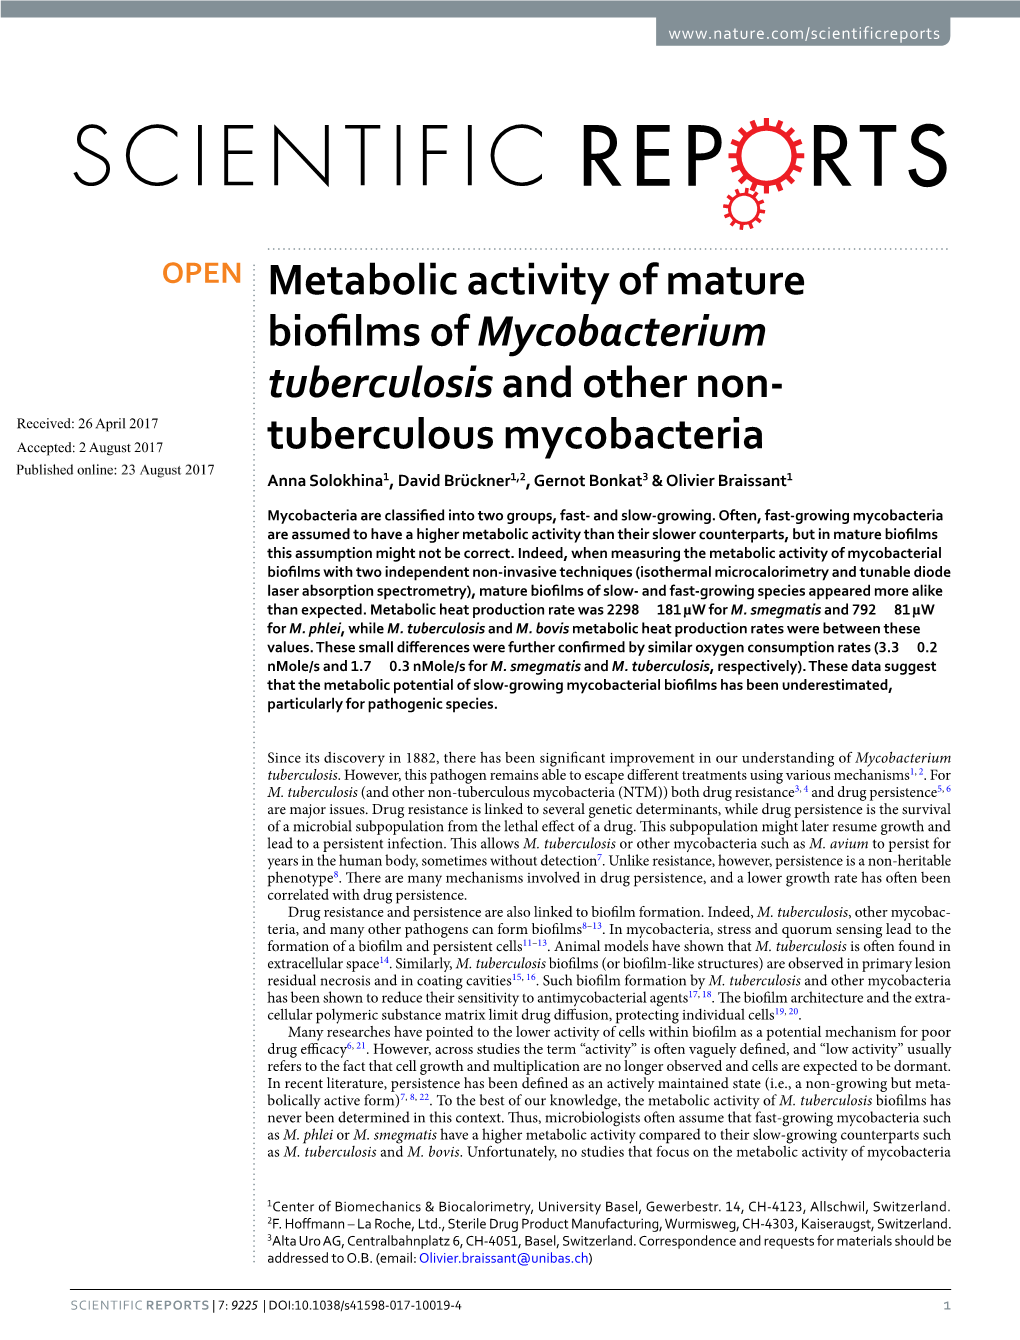 Metabolic Activity of Mature Biofilms of Mycobacterium Tuberculosis and Other Non-Tuberculous Mycobacteria